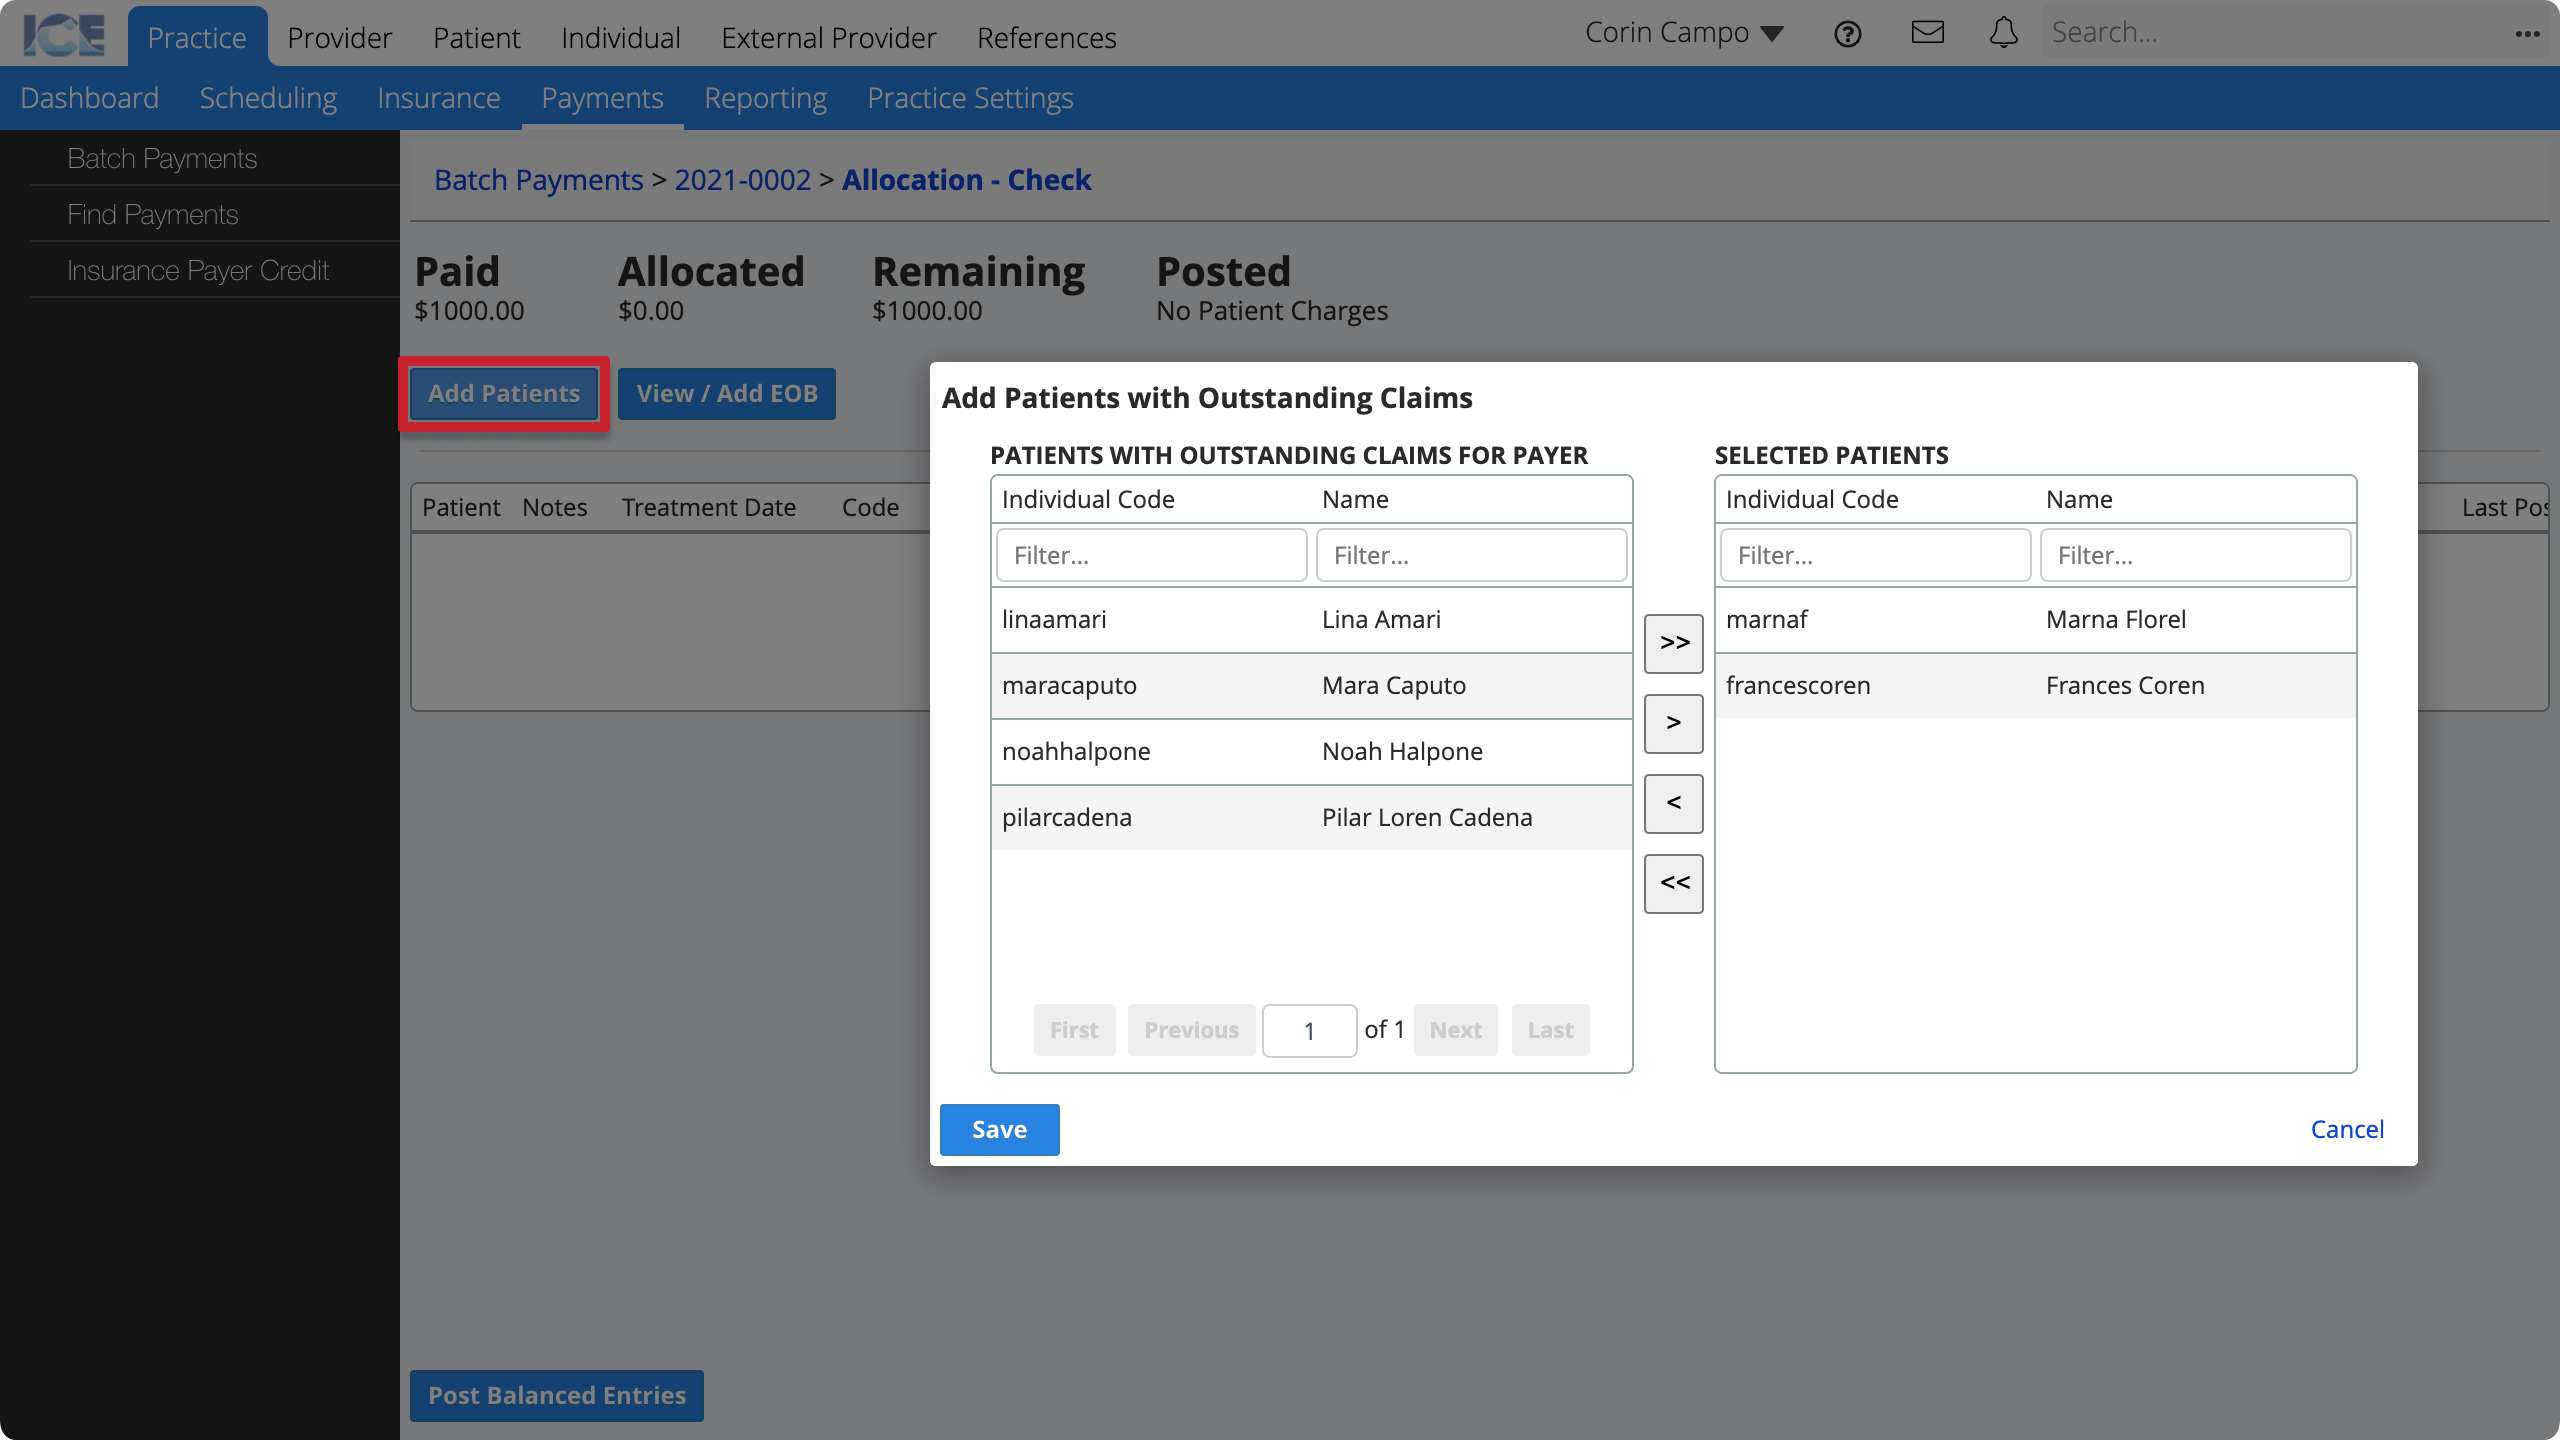 The Add Patients button is in the top left of the workspace. The Add Patients selection dialog shows two tables. Patients With Outstanding Claims For Payer on the left, and Selected Patients on the right. The buttons between the tables let you move all or specific patients left and right.